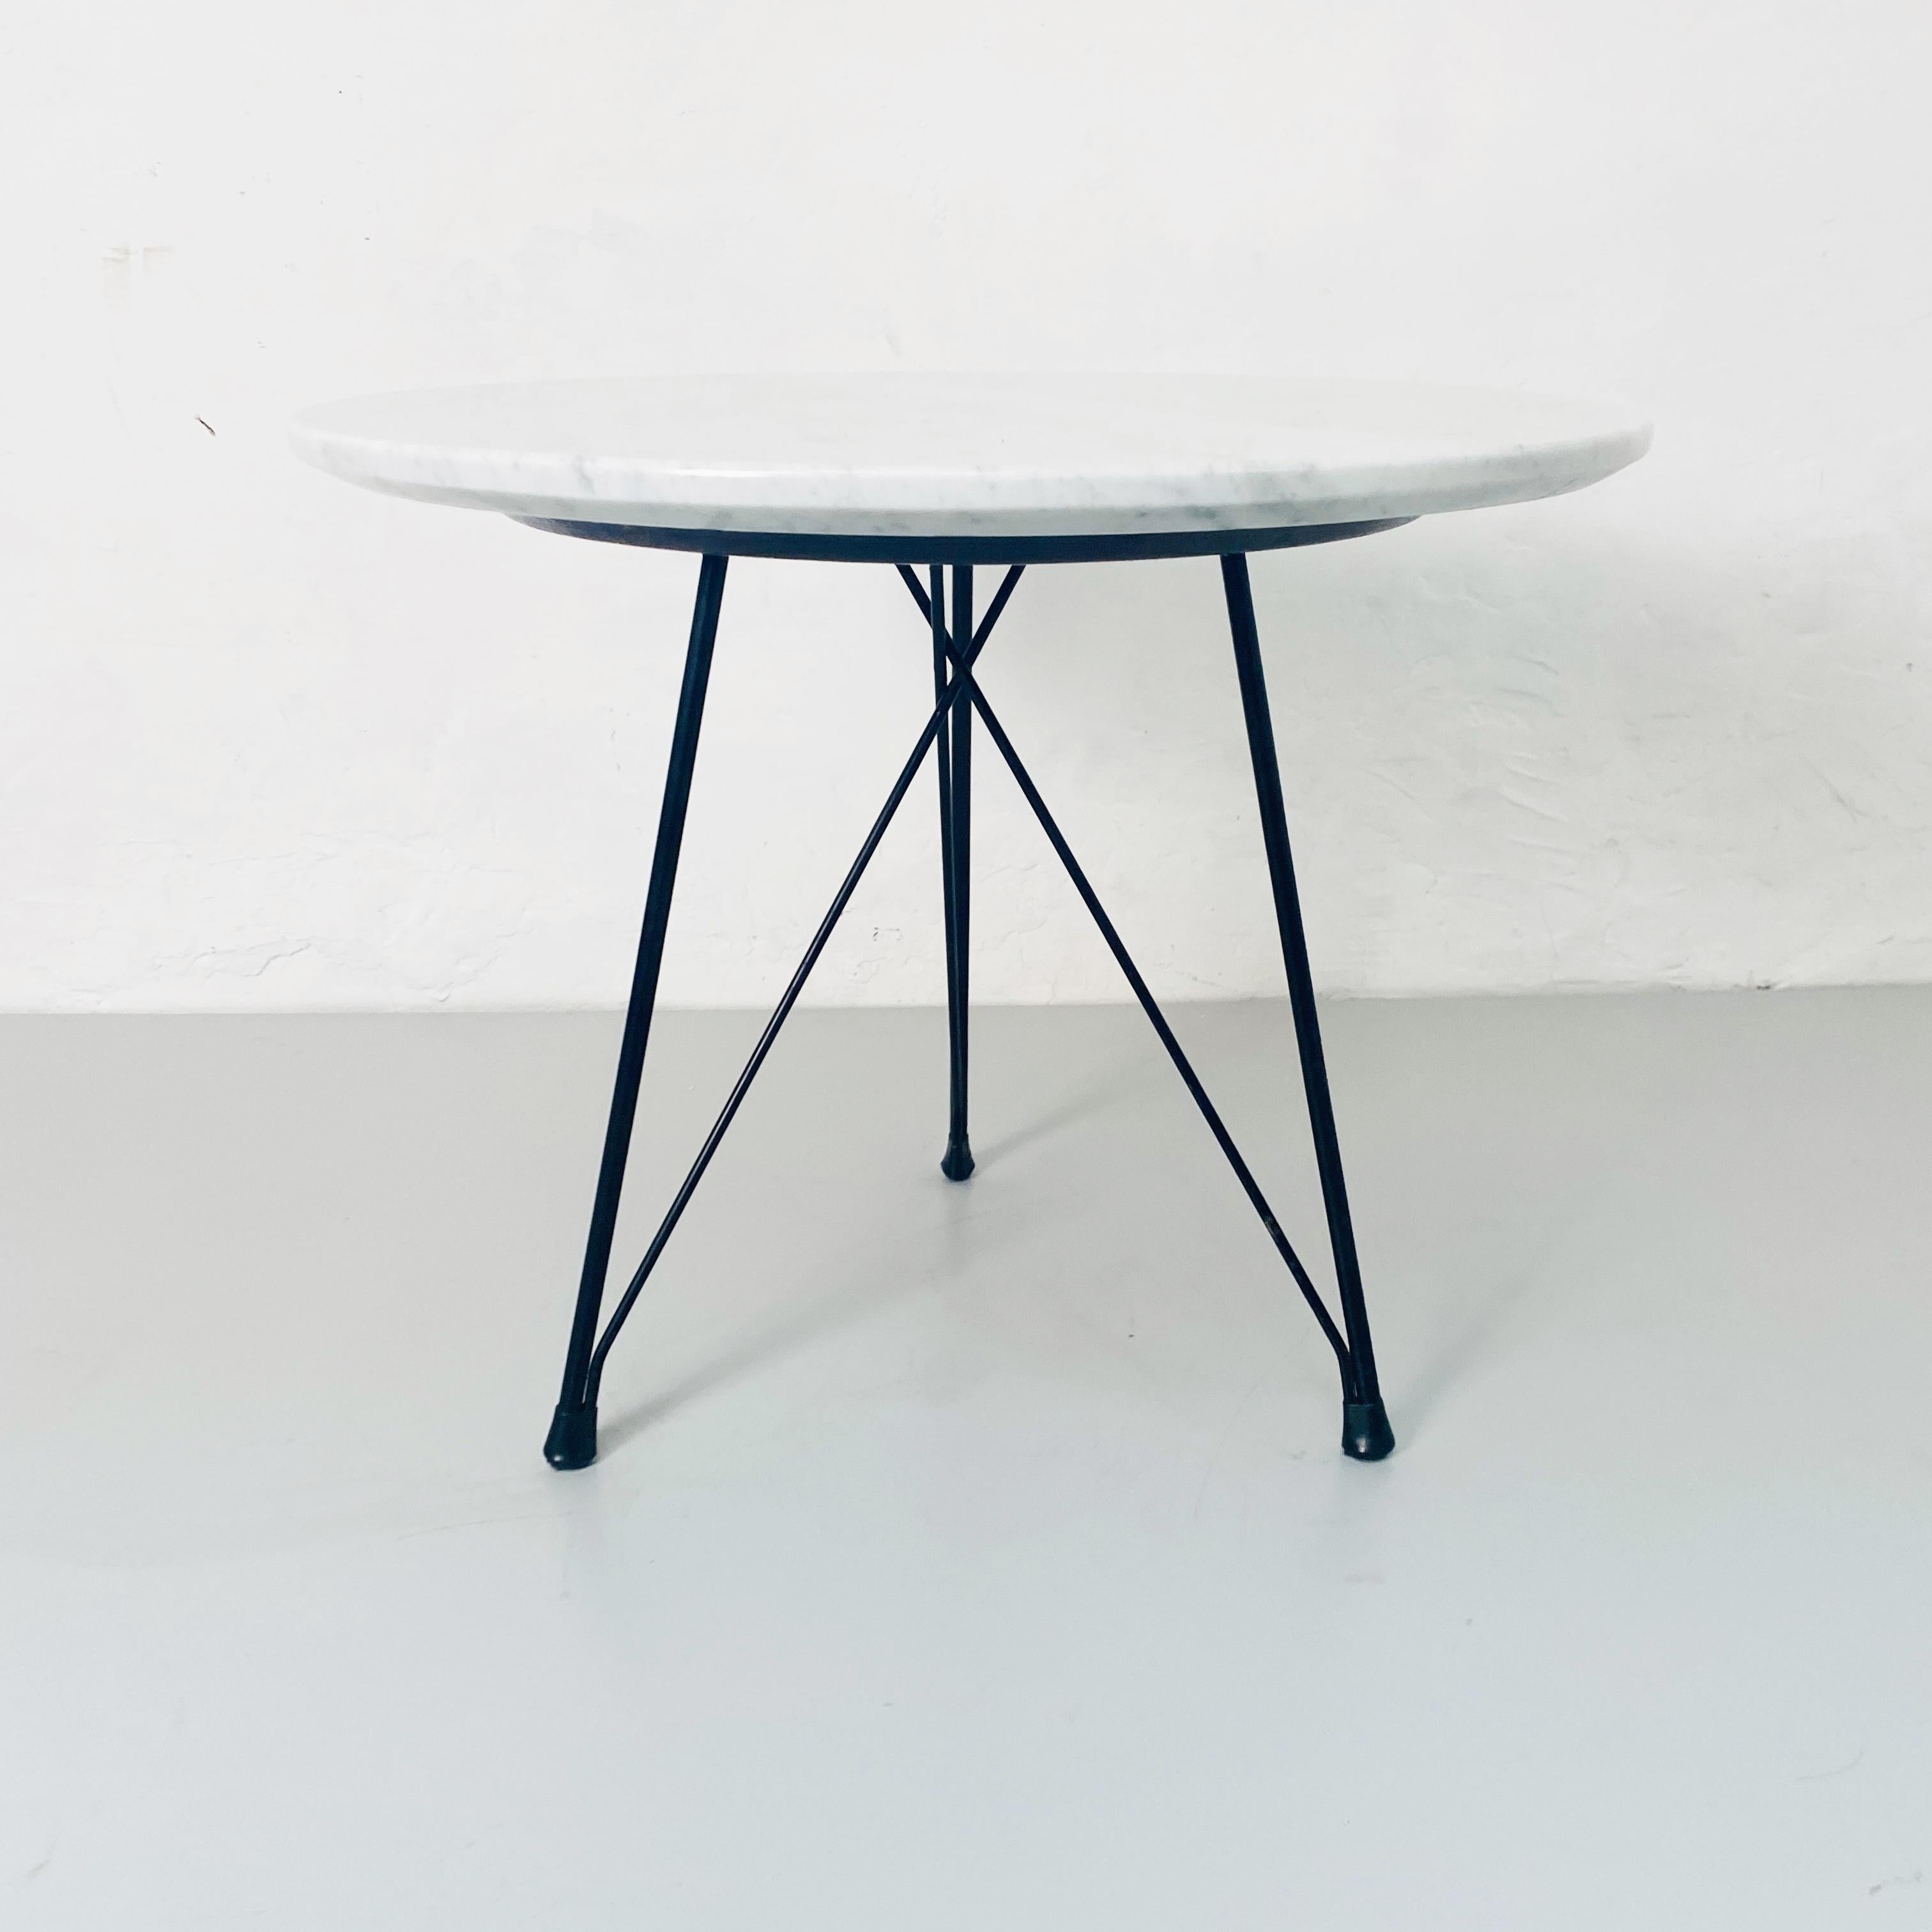 Round coffee table in marble and black enamelled metal, 1960s
beautiful small table, perfect for living, bathroom, night table coffee table, versatile, and elegance.
Realized in the 1950 or 1960 with round white Carrara marble with gray veins and